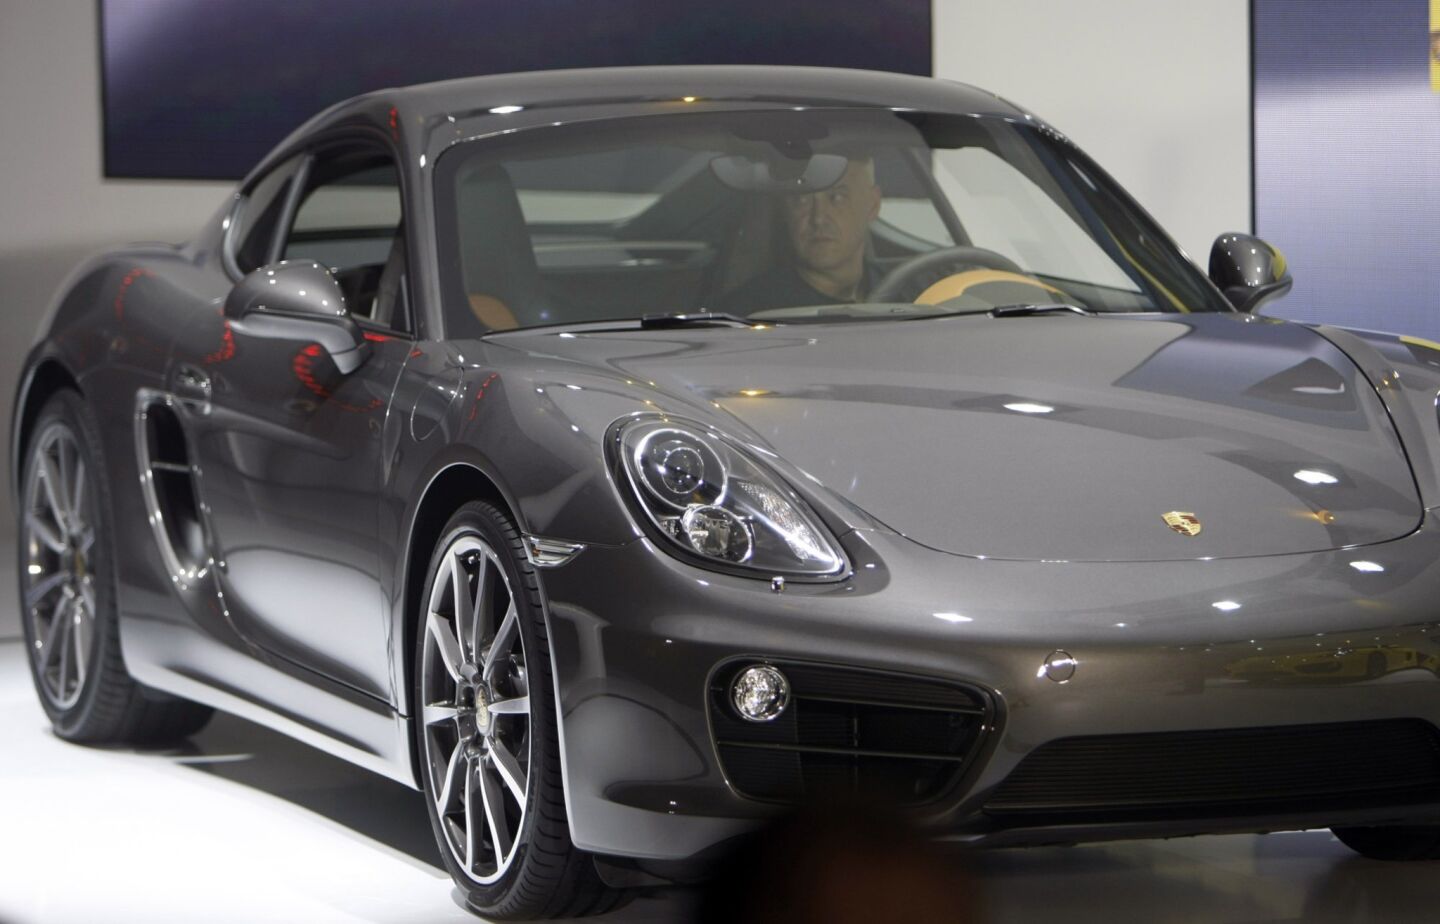 Porsche introduces the new Cayman.More: $54,000 for Porsche Cayman base model; price zooms from there